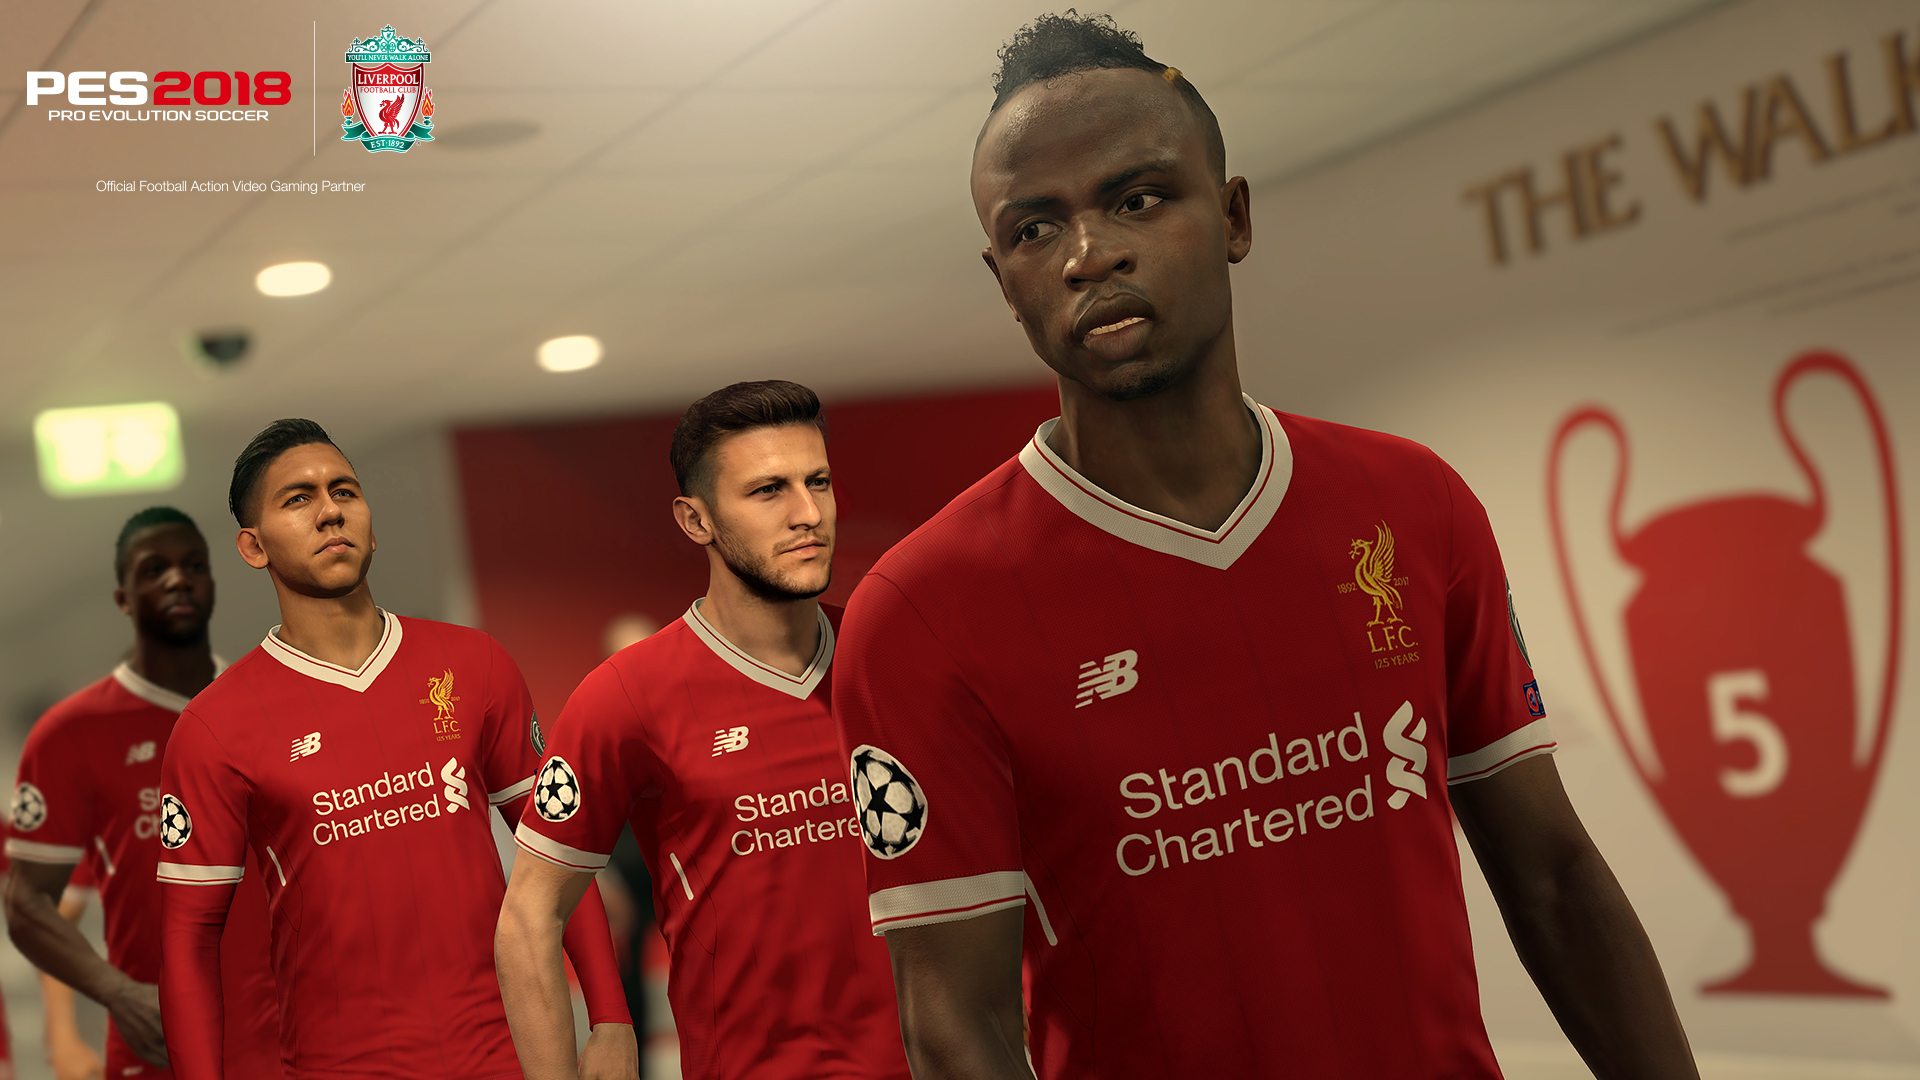 PES 2018 Pro Evolution Soccer 2018 PS4 Xbox One PC Liverpool